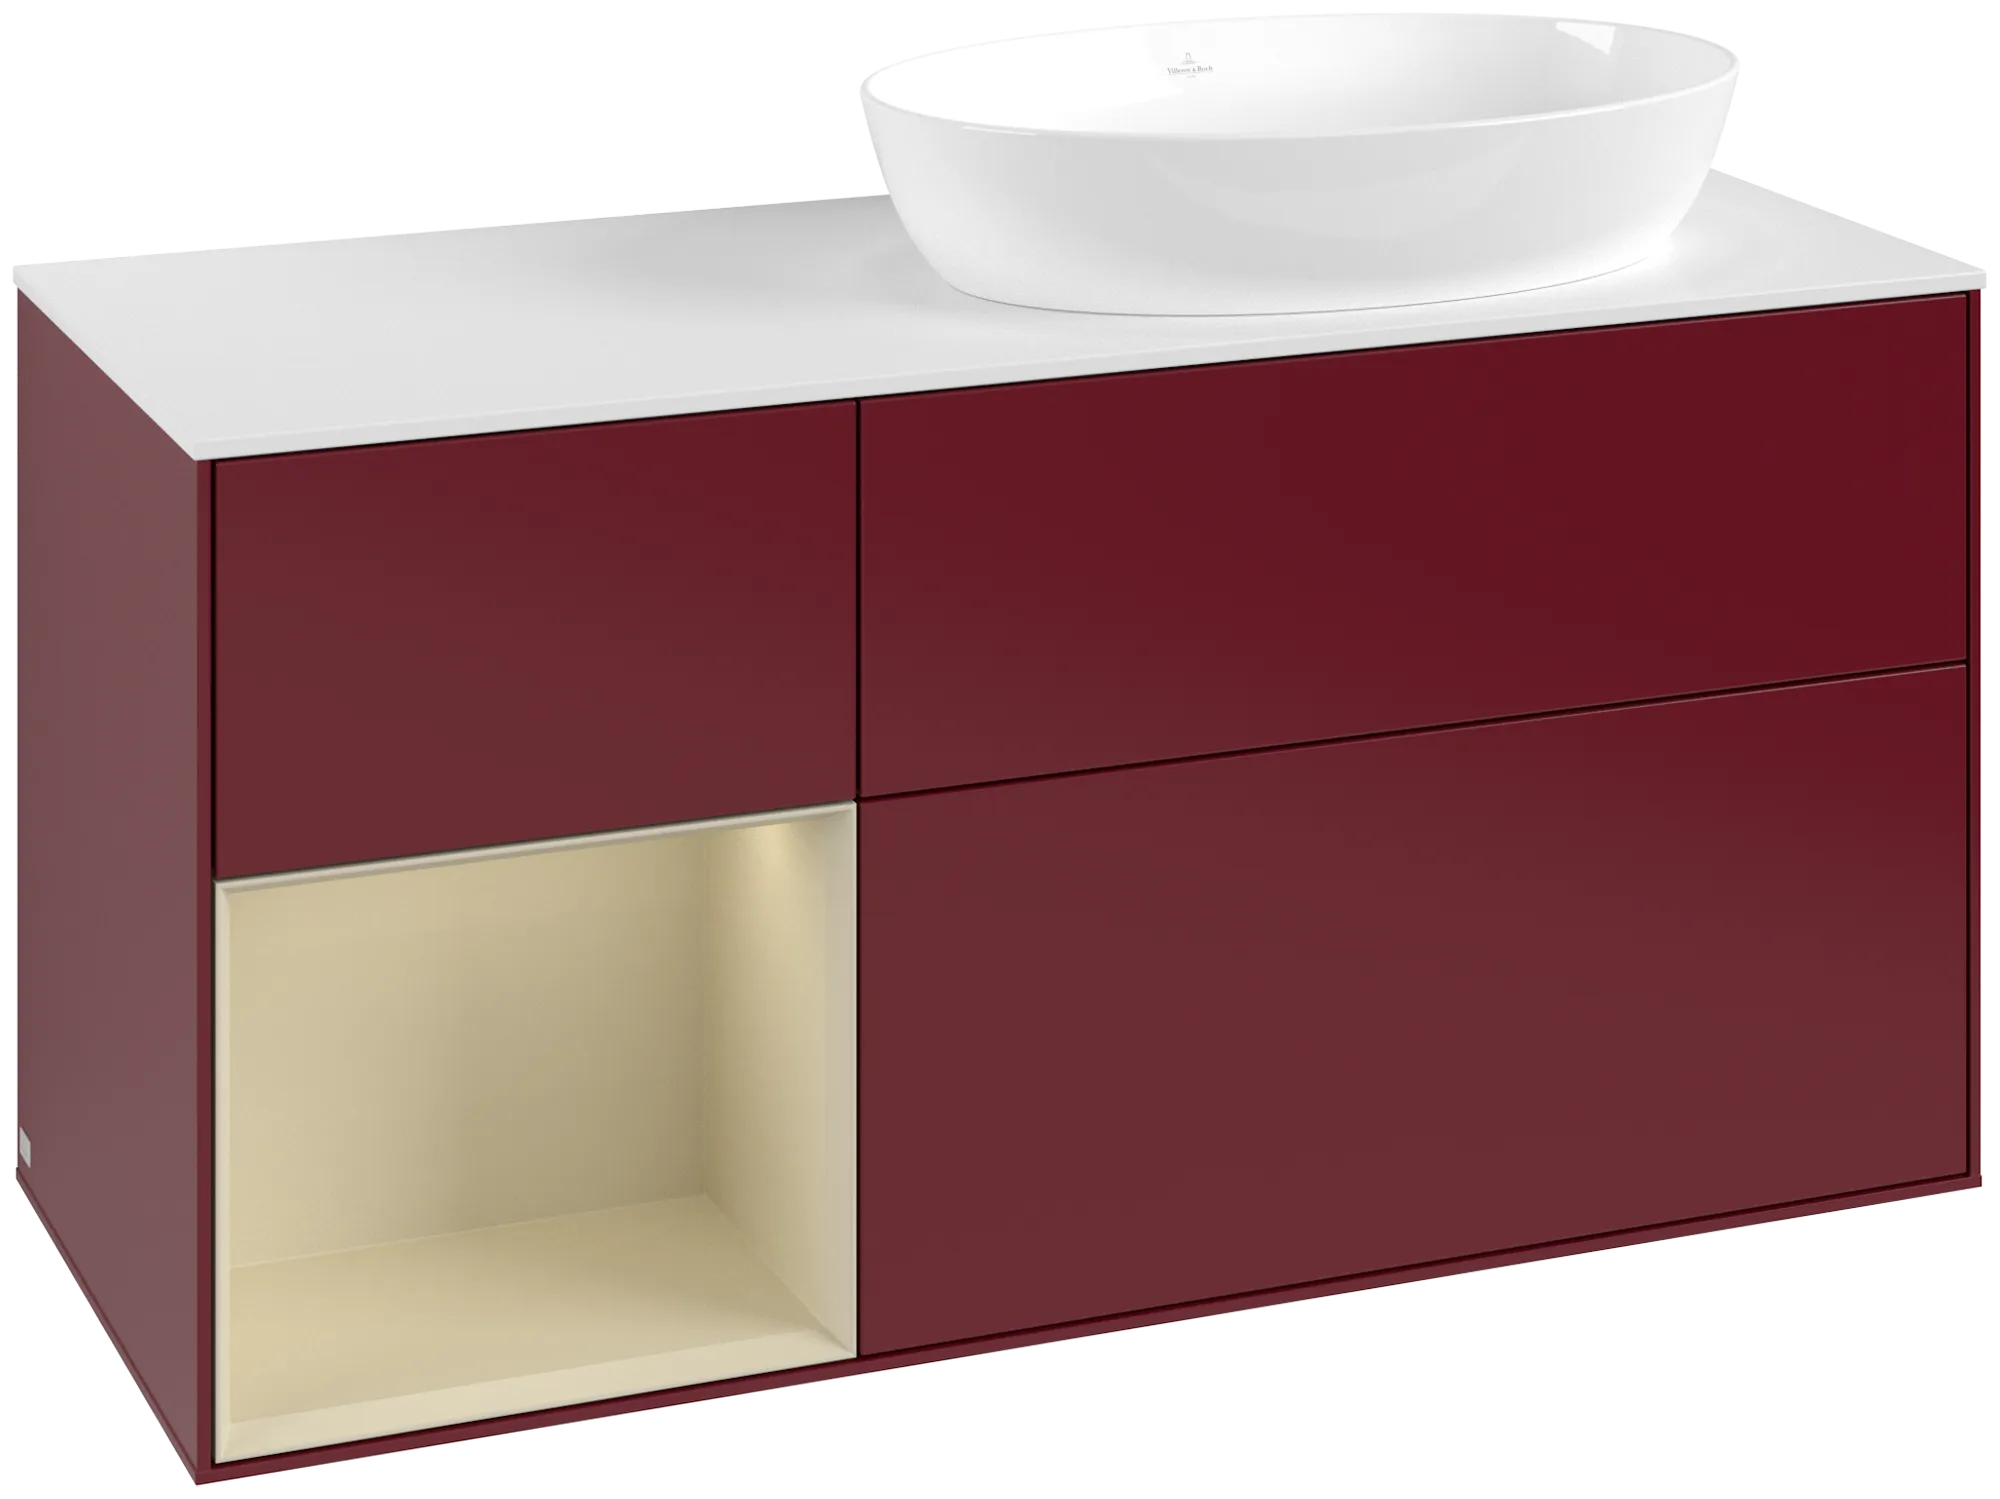 Picture of VILLEROY BOCH Finion Vanity unit, with lighting, 3 pull-out compartments, 1200 x 603 x 501 mm, Peony Matt Lacquer / Silk Grey Matt Lacquer / Glass White Matt #GA41HJHB